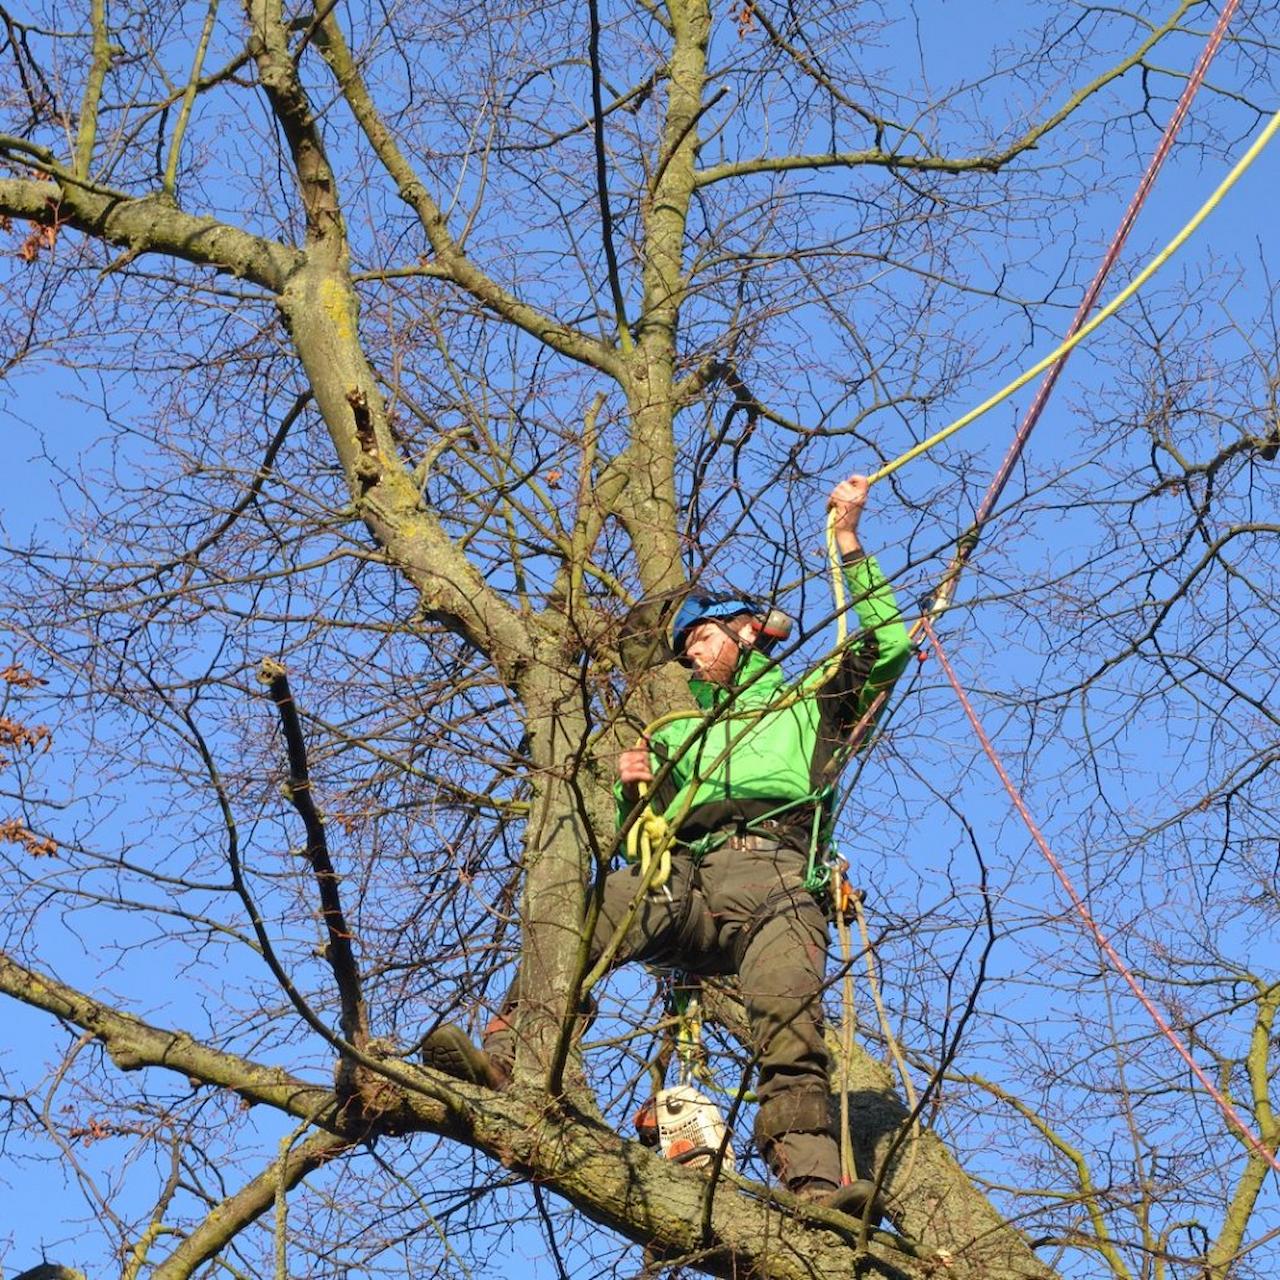 What Would You Consider When Opting For Tree Surgery Services?